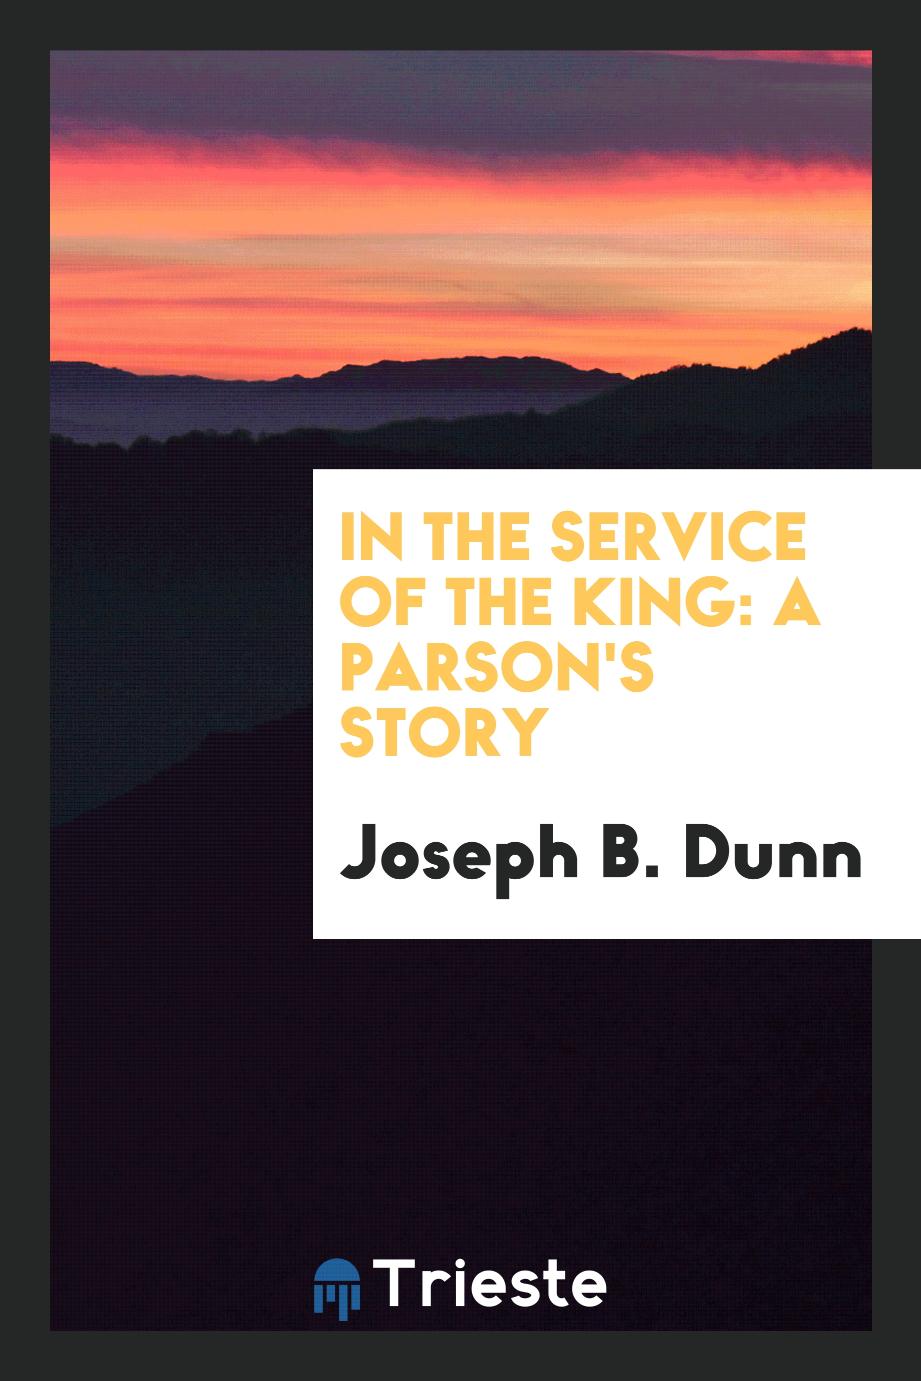 In the Service of the King: A Parson's Story